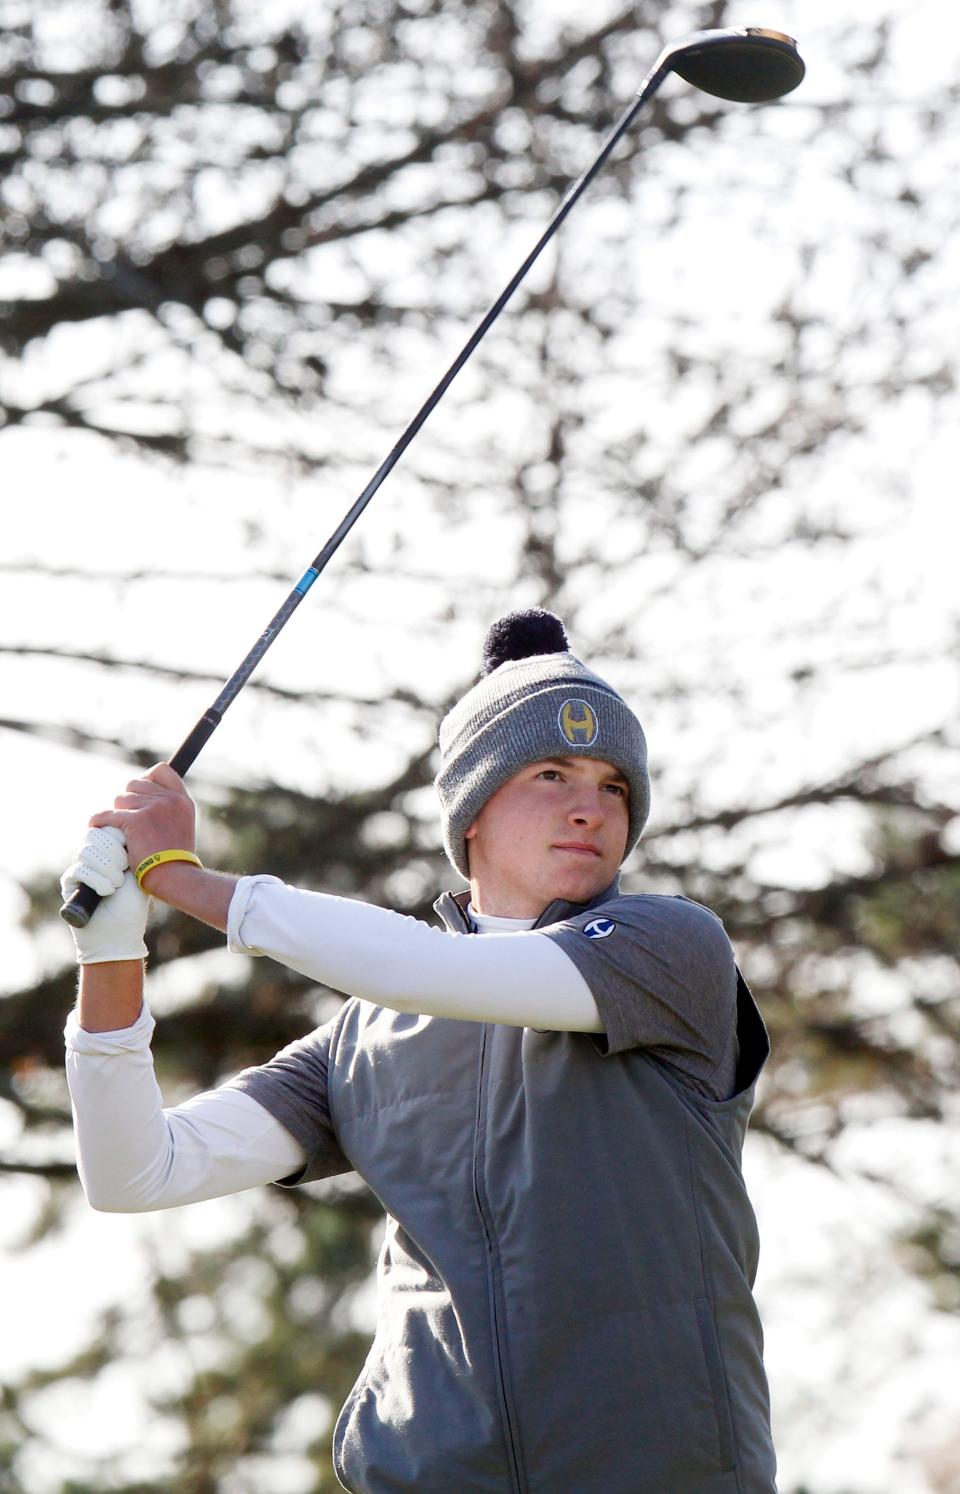 Archbishop Hoban's Chris Pollak tees-off during the round one of the Division I Boys State Golf Championships at the Ohio State Golf Club Scarlet Course on Oct. 21.